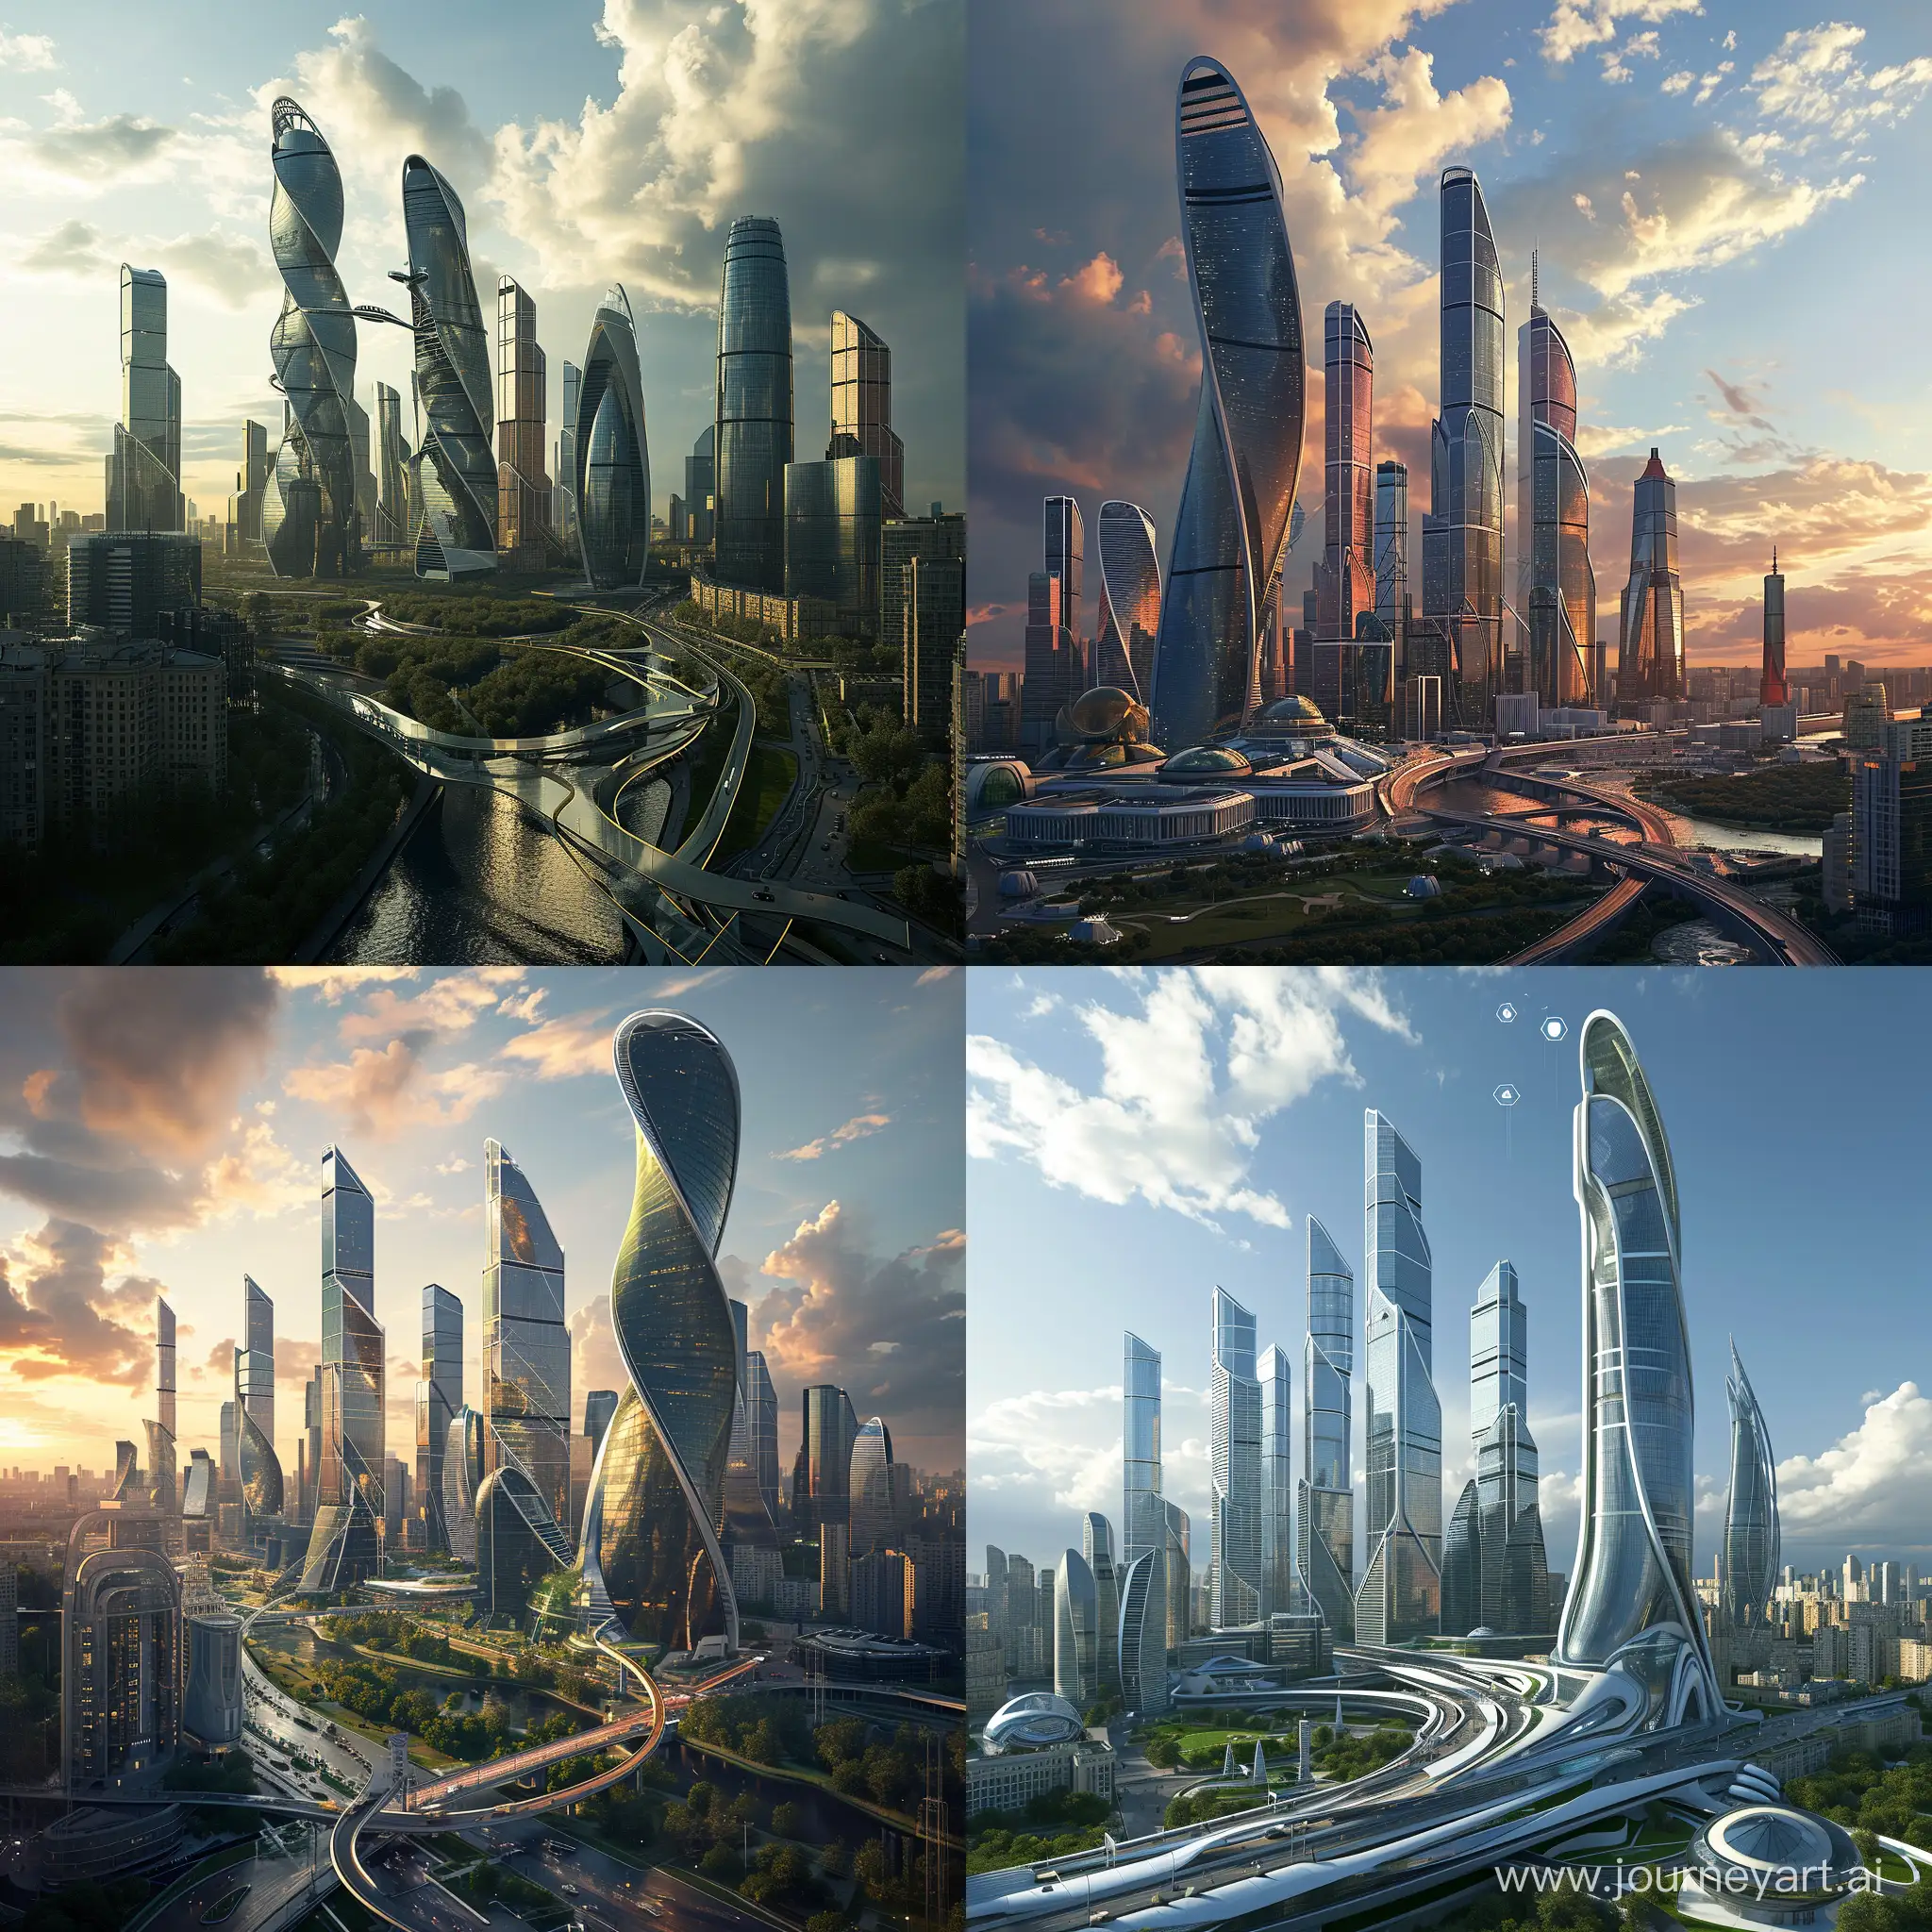 Futuristic-Moscow-SkyHigh-Skyscrapers-Smart-Infrastructure